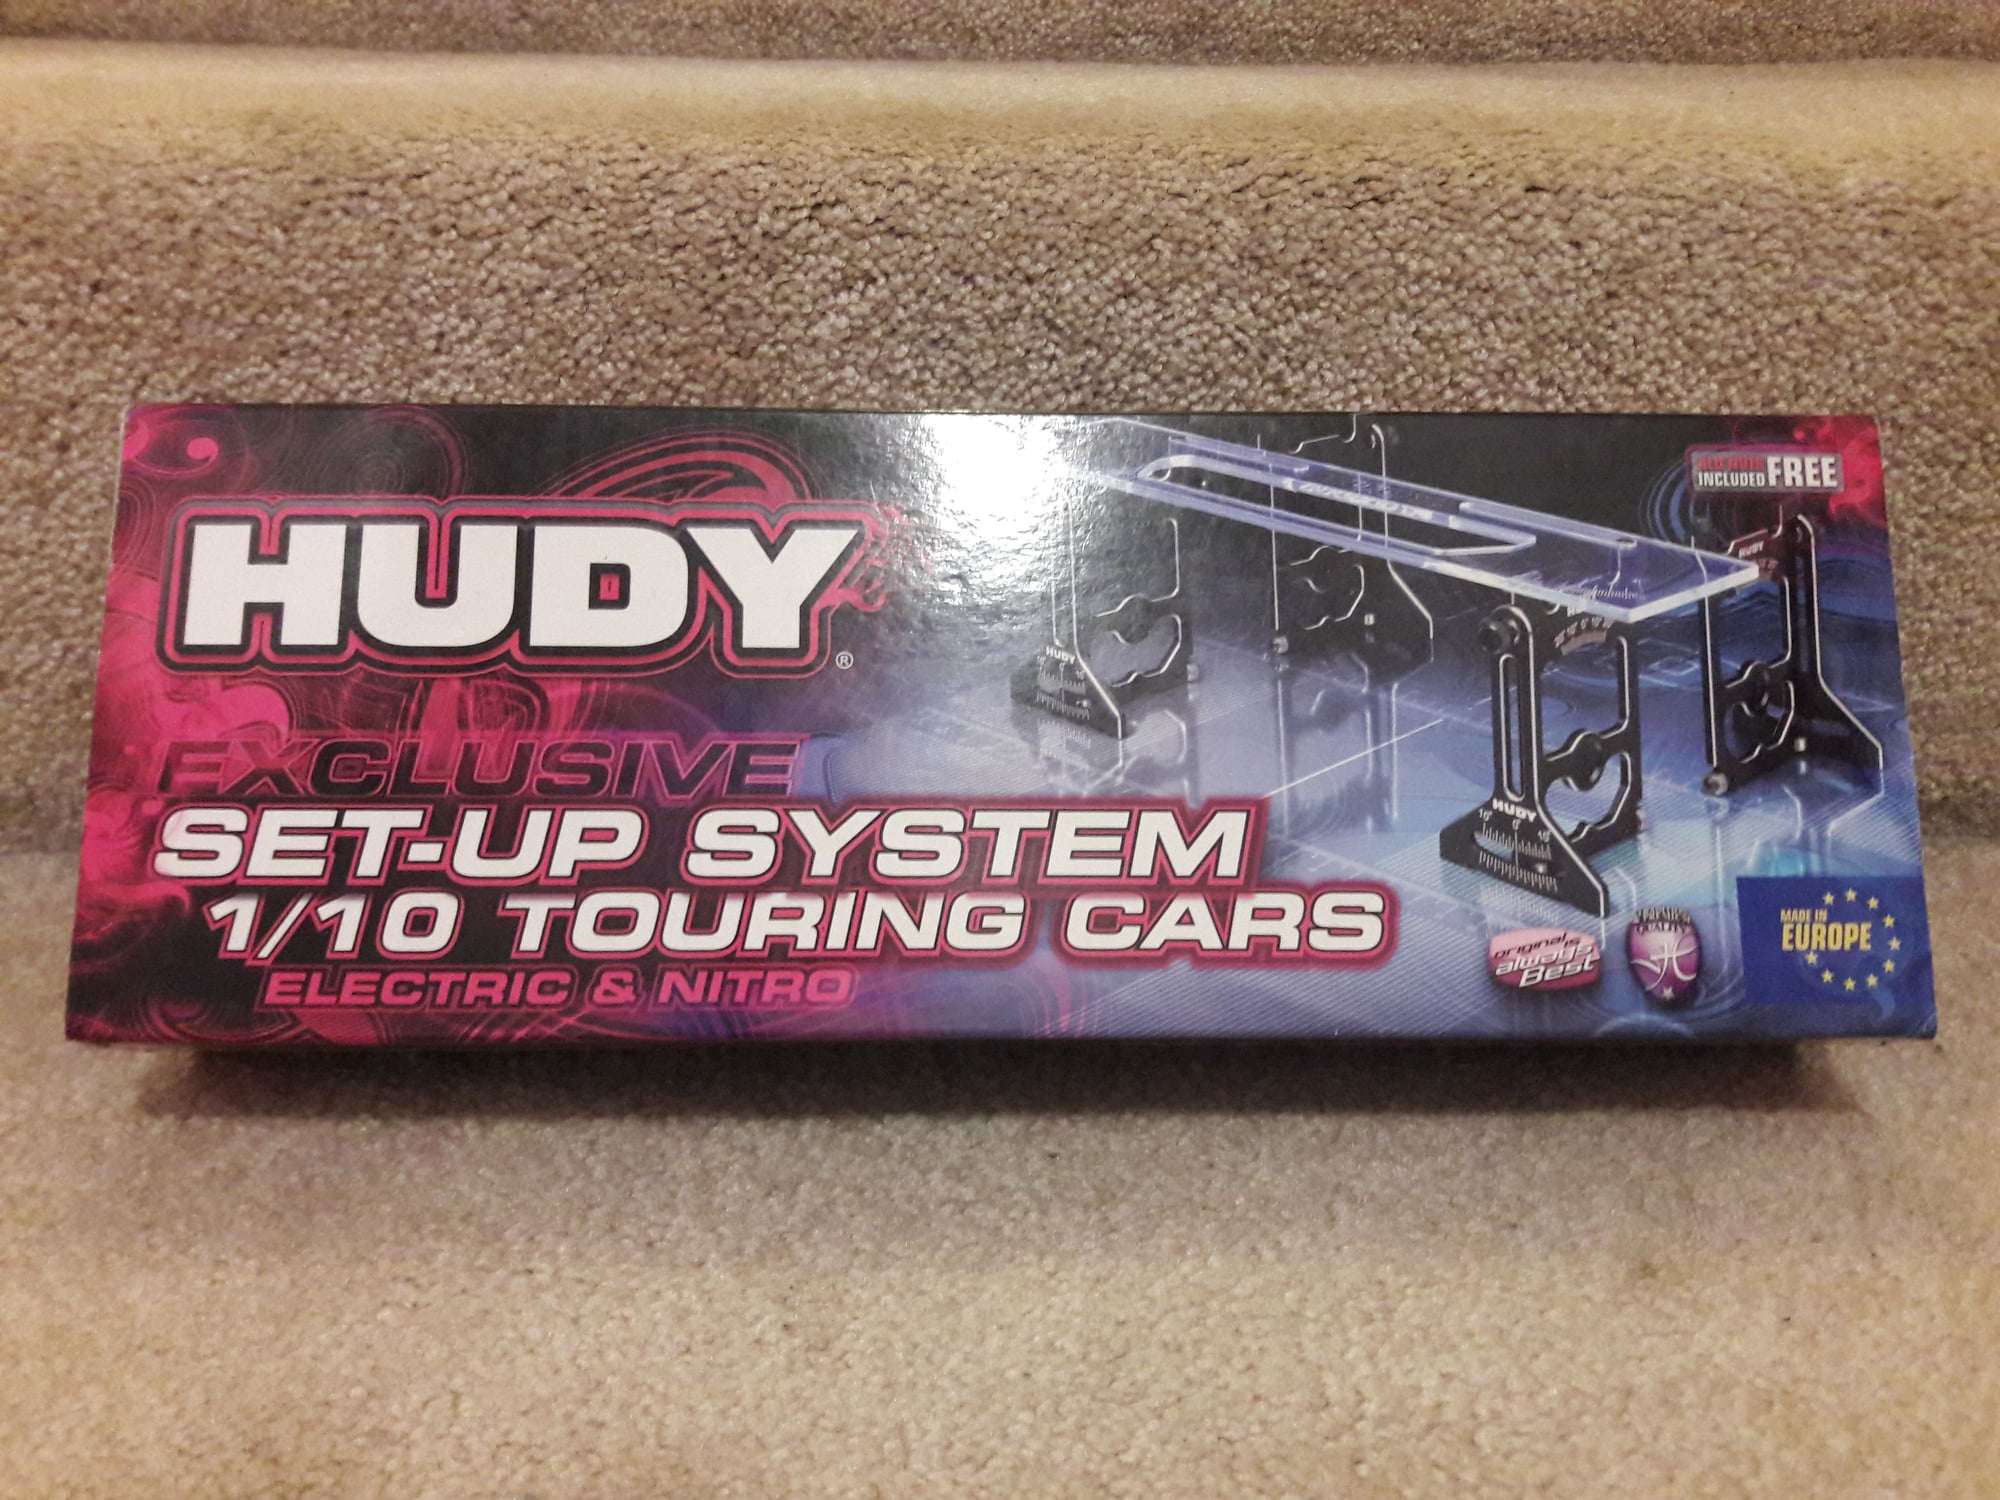 Hudy universal exclusive set-up system for 1/10 Touring cars - R/C Tech